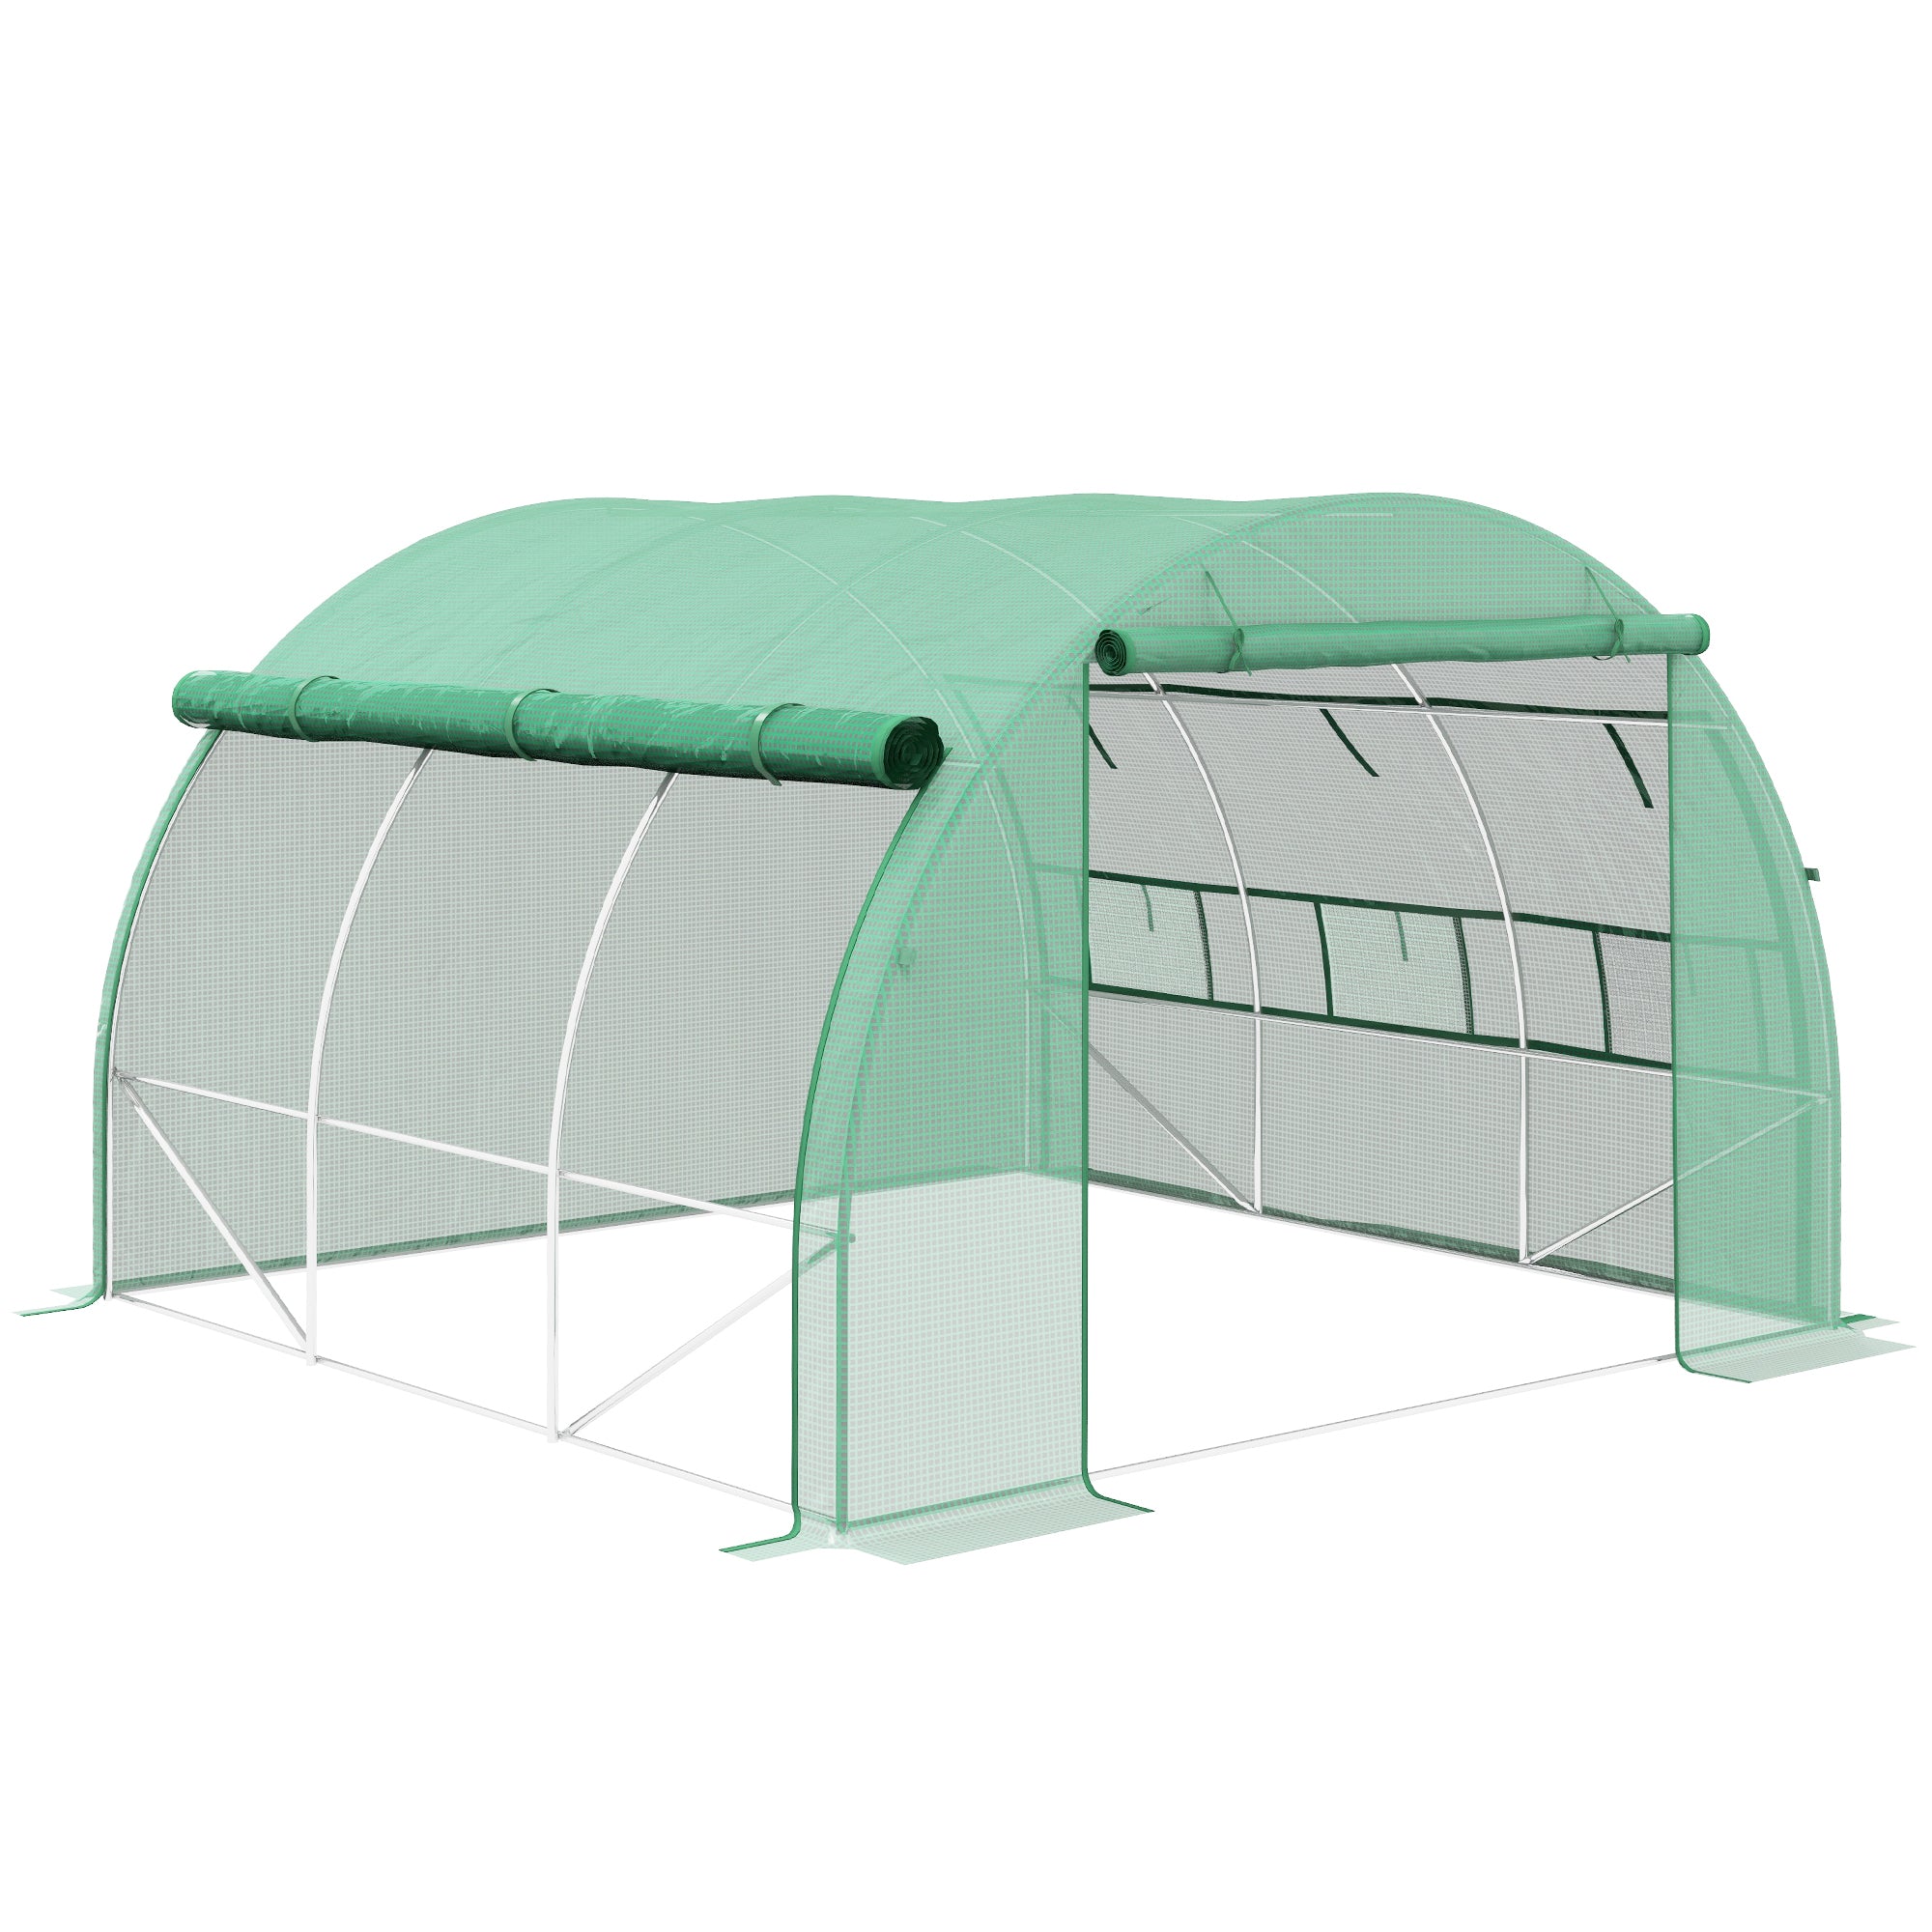 Outsunny 3 x 3 x 2 m Polytunnel Greenhouse Pollytunnel Tent Steel Frame Green  | TJ Hughes Light Grey